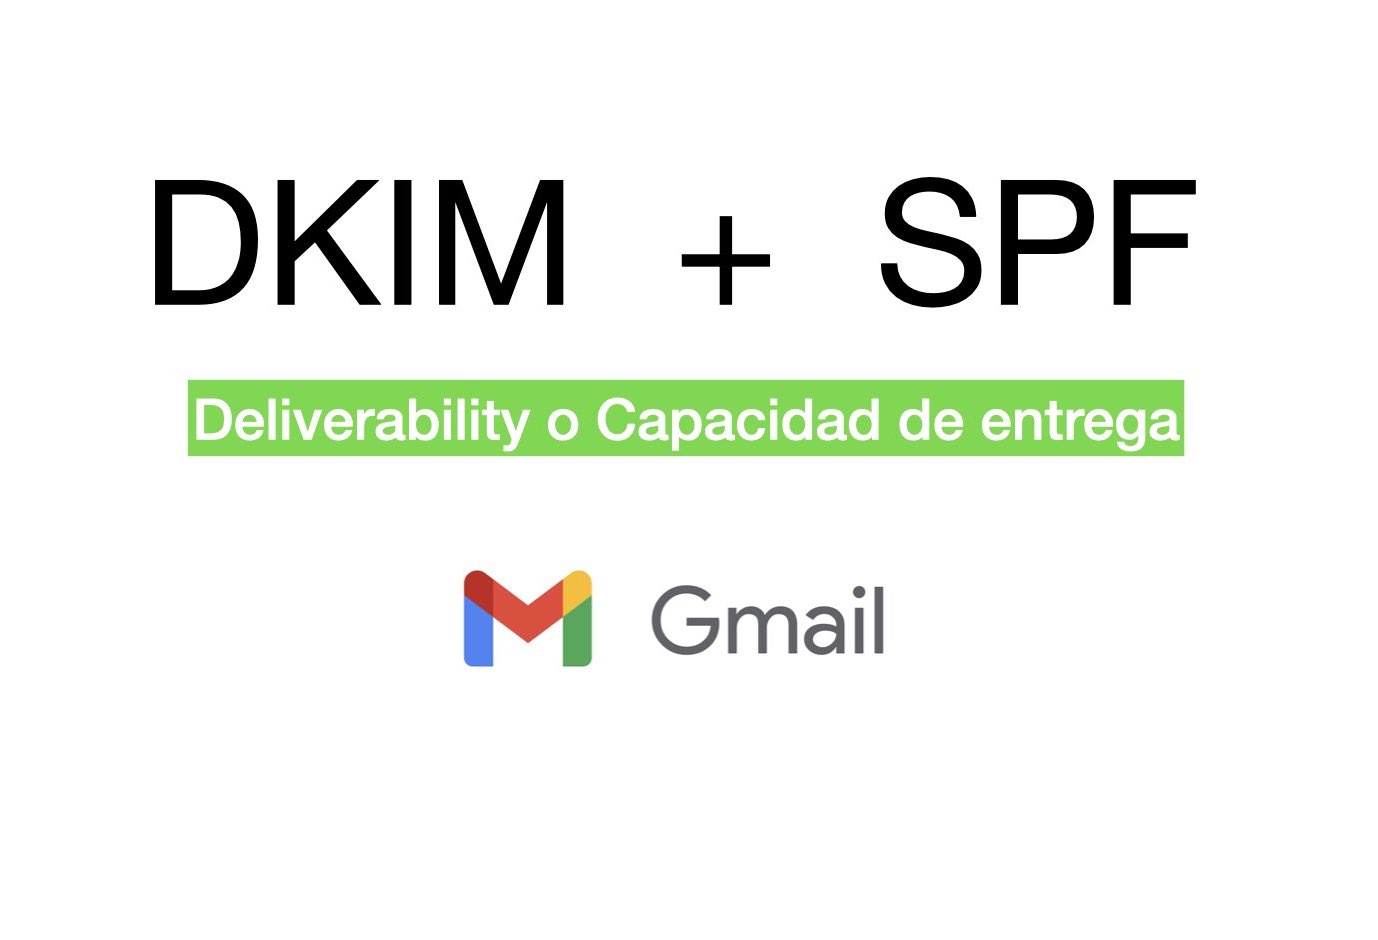 DKIM & SPF now achieve even better email deliverability when fully implemented, thanks to an unexpected catalyst 1